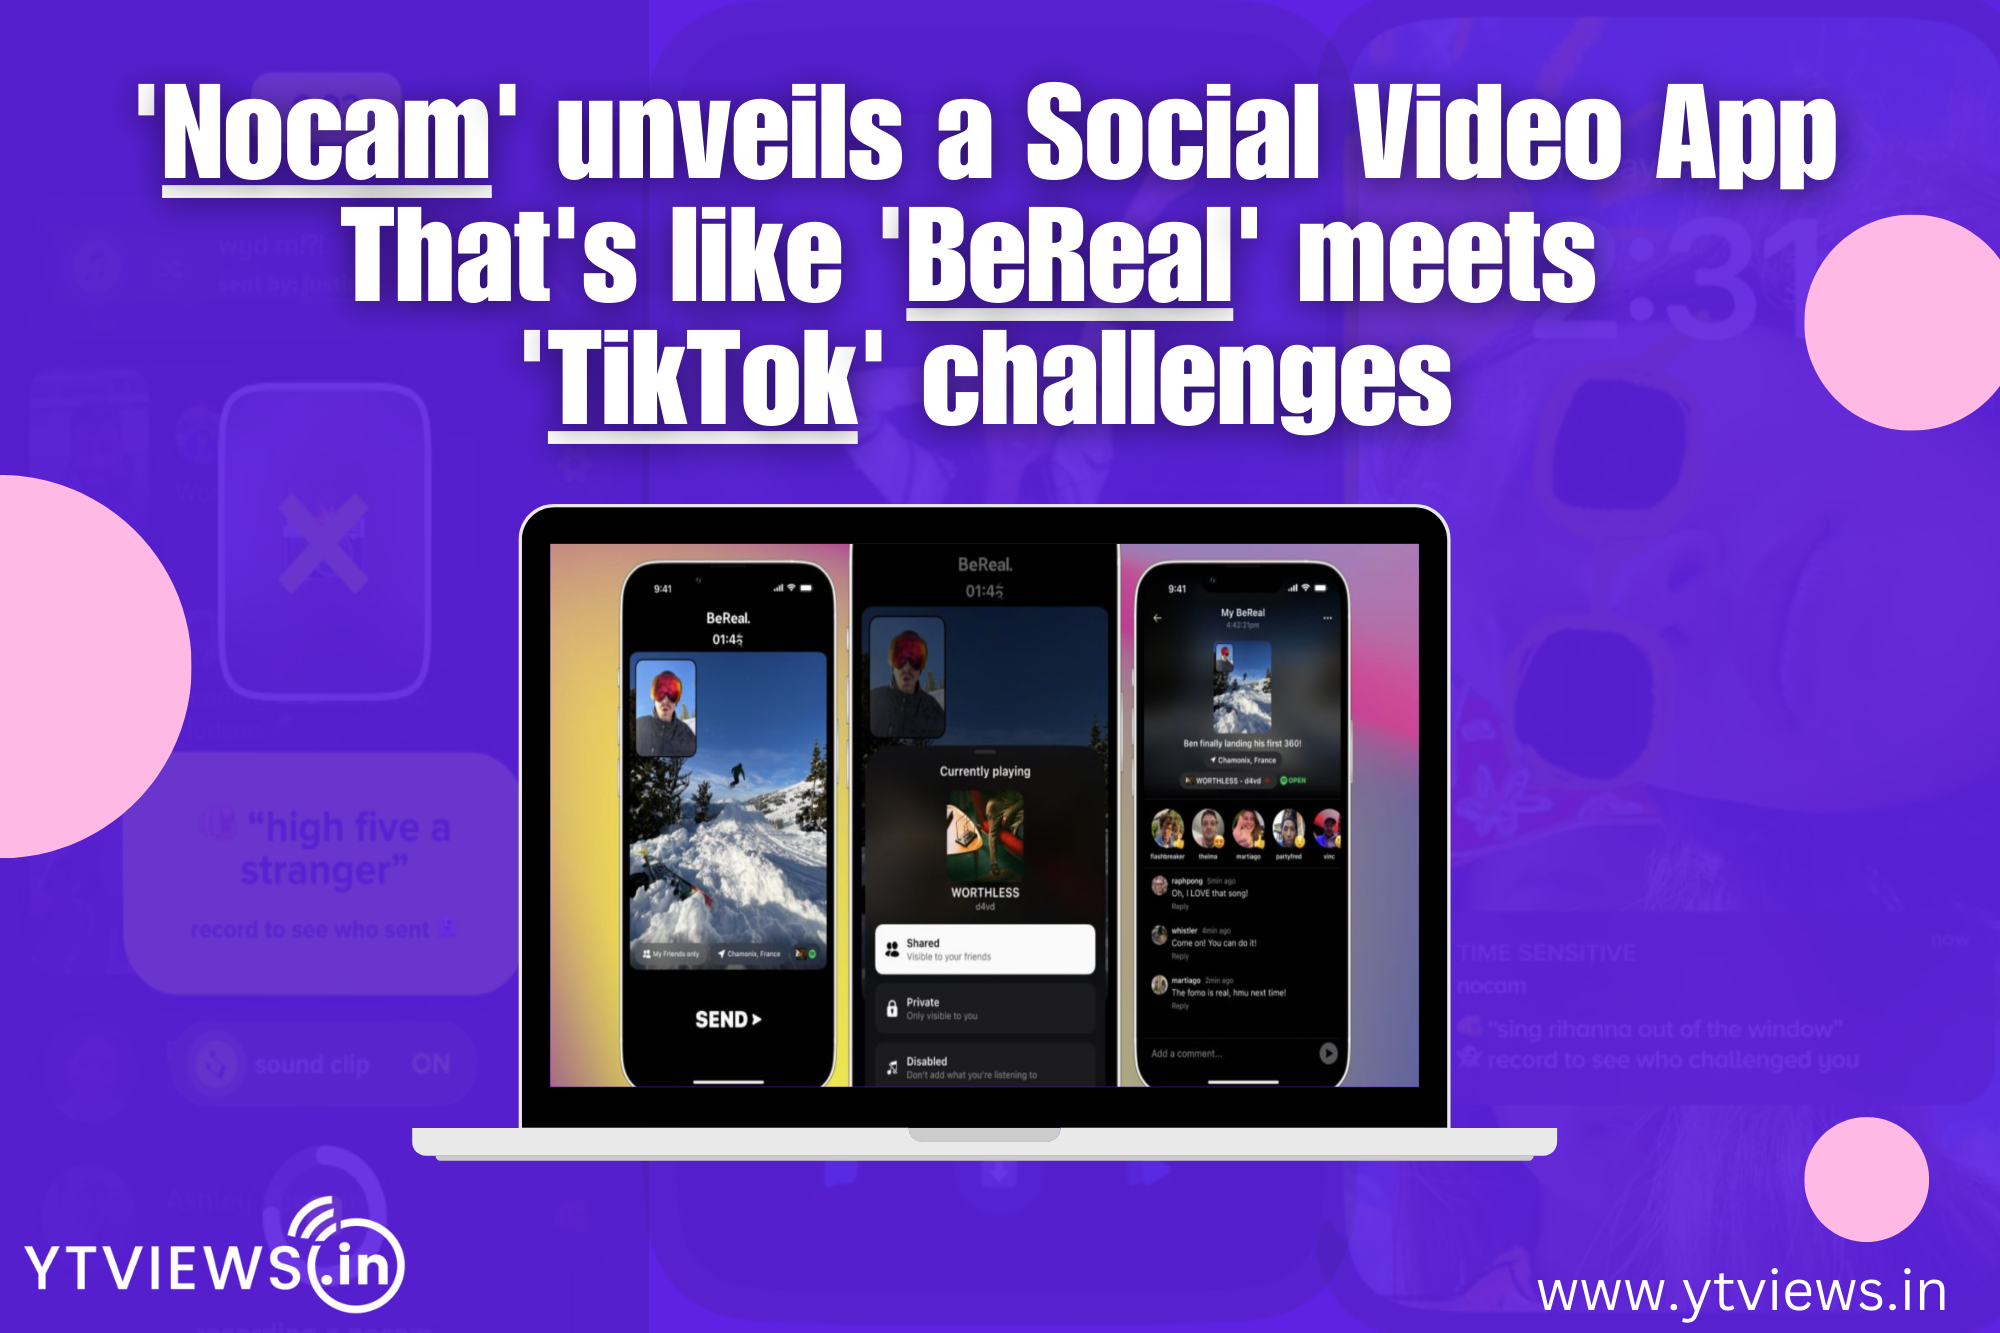 BeReal meets TikTok challenges in Nocam’s new social video app that encourages users to be themselves